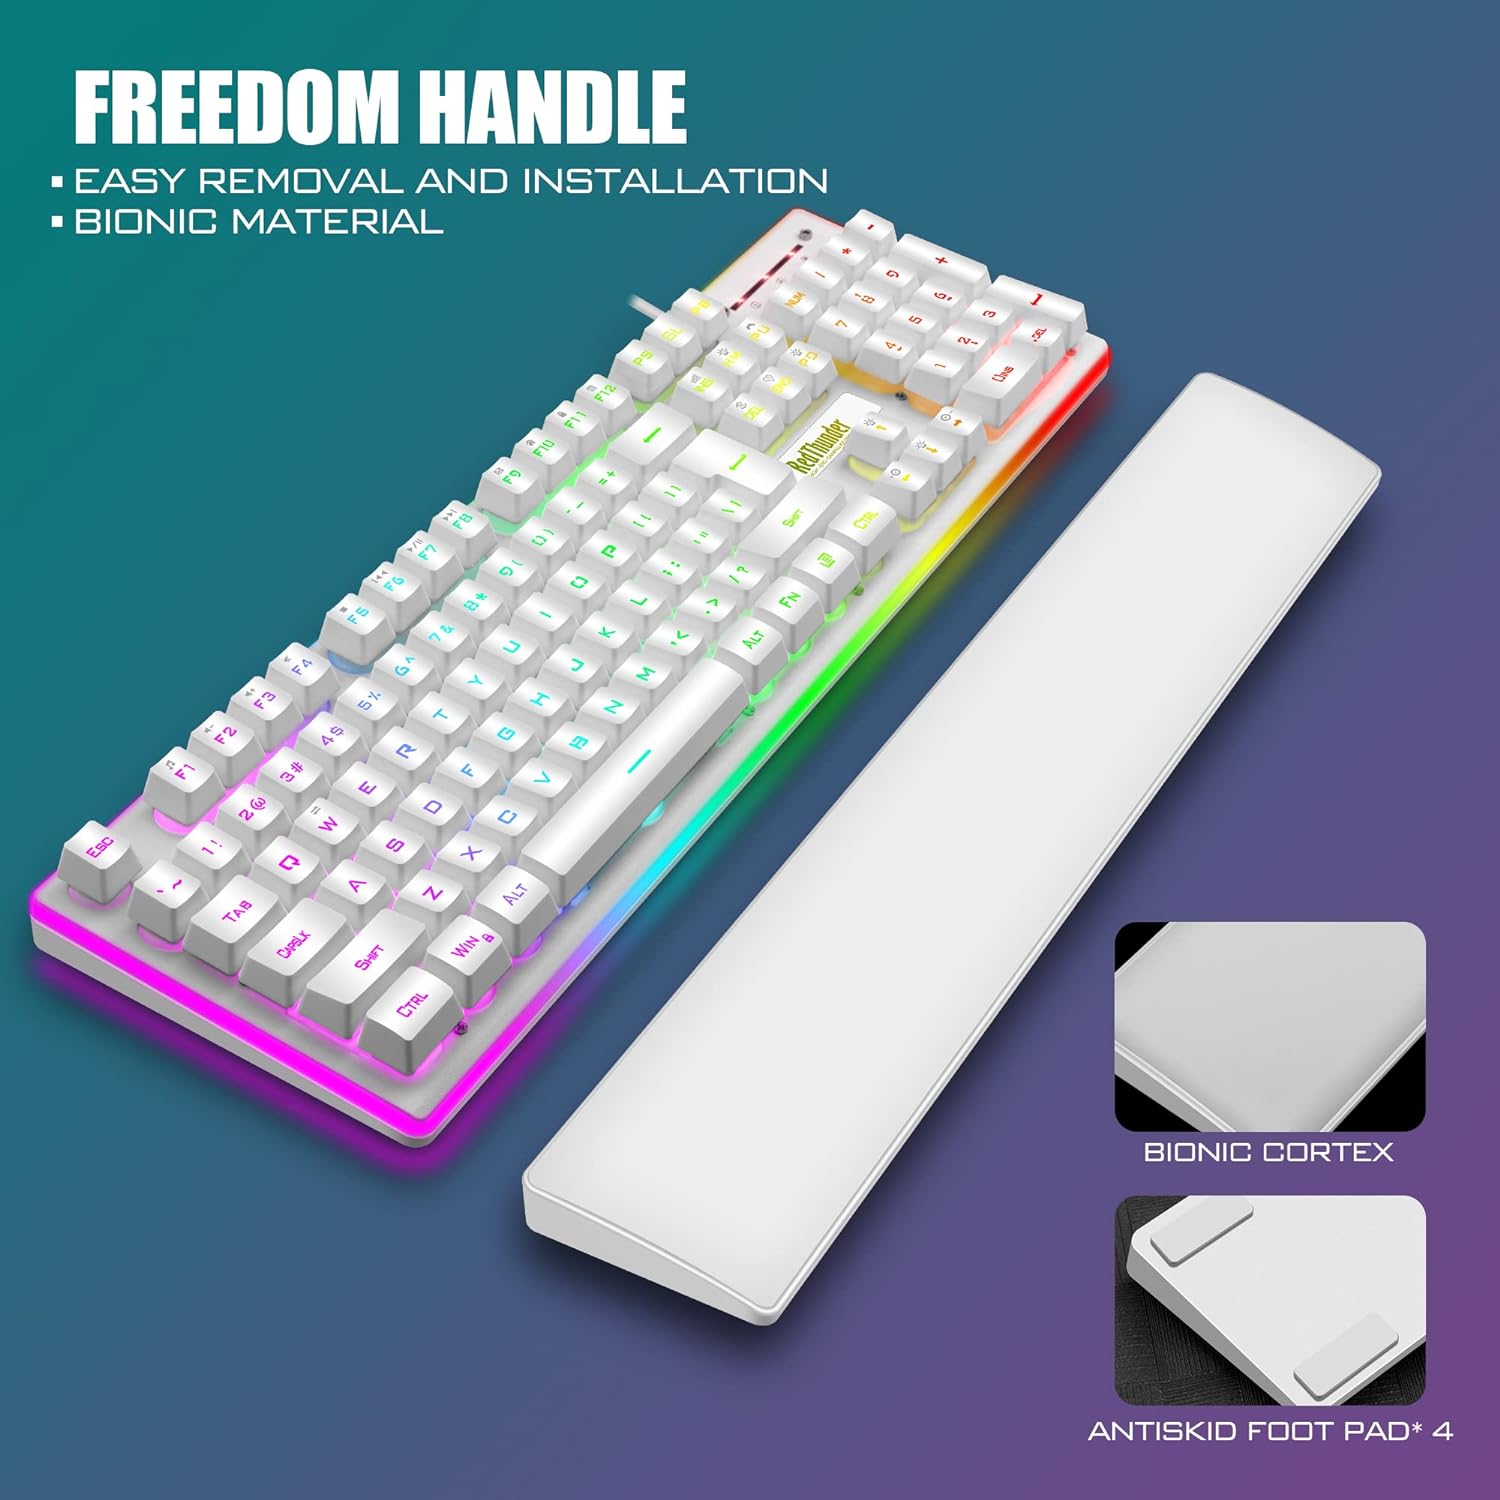 RGB Gaming Keyboard and Mouse Combo,87 Key Gaming Keyboard USB Wired RGB Backlit Gaming Keyboard Mechanical Feeling with Gaming Mouse, White Keyboard Wired Set for PC MAC Chrome PS4 Xbox Laptop